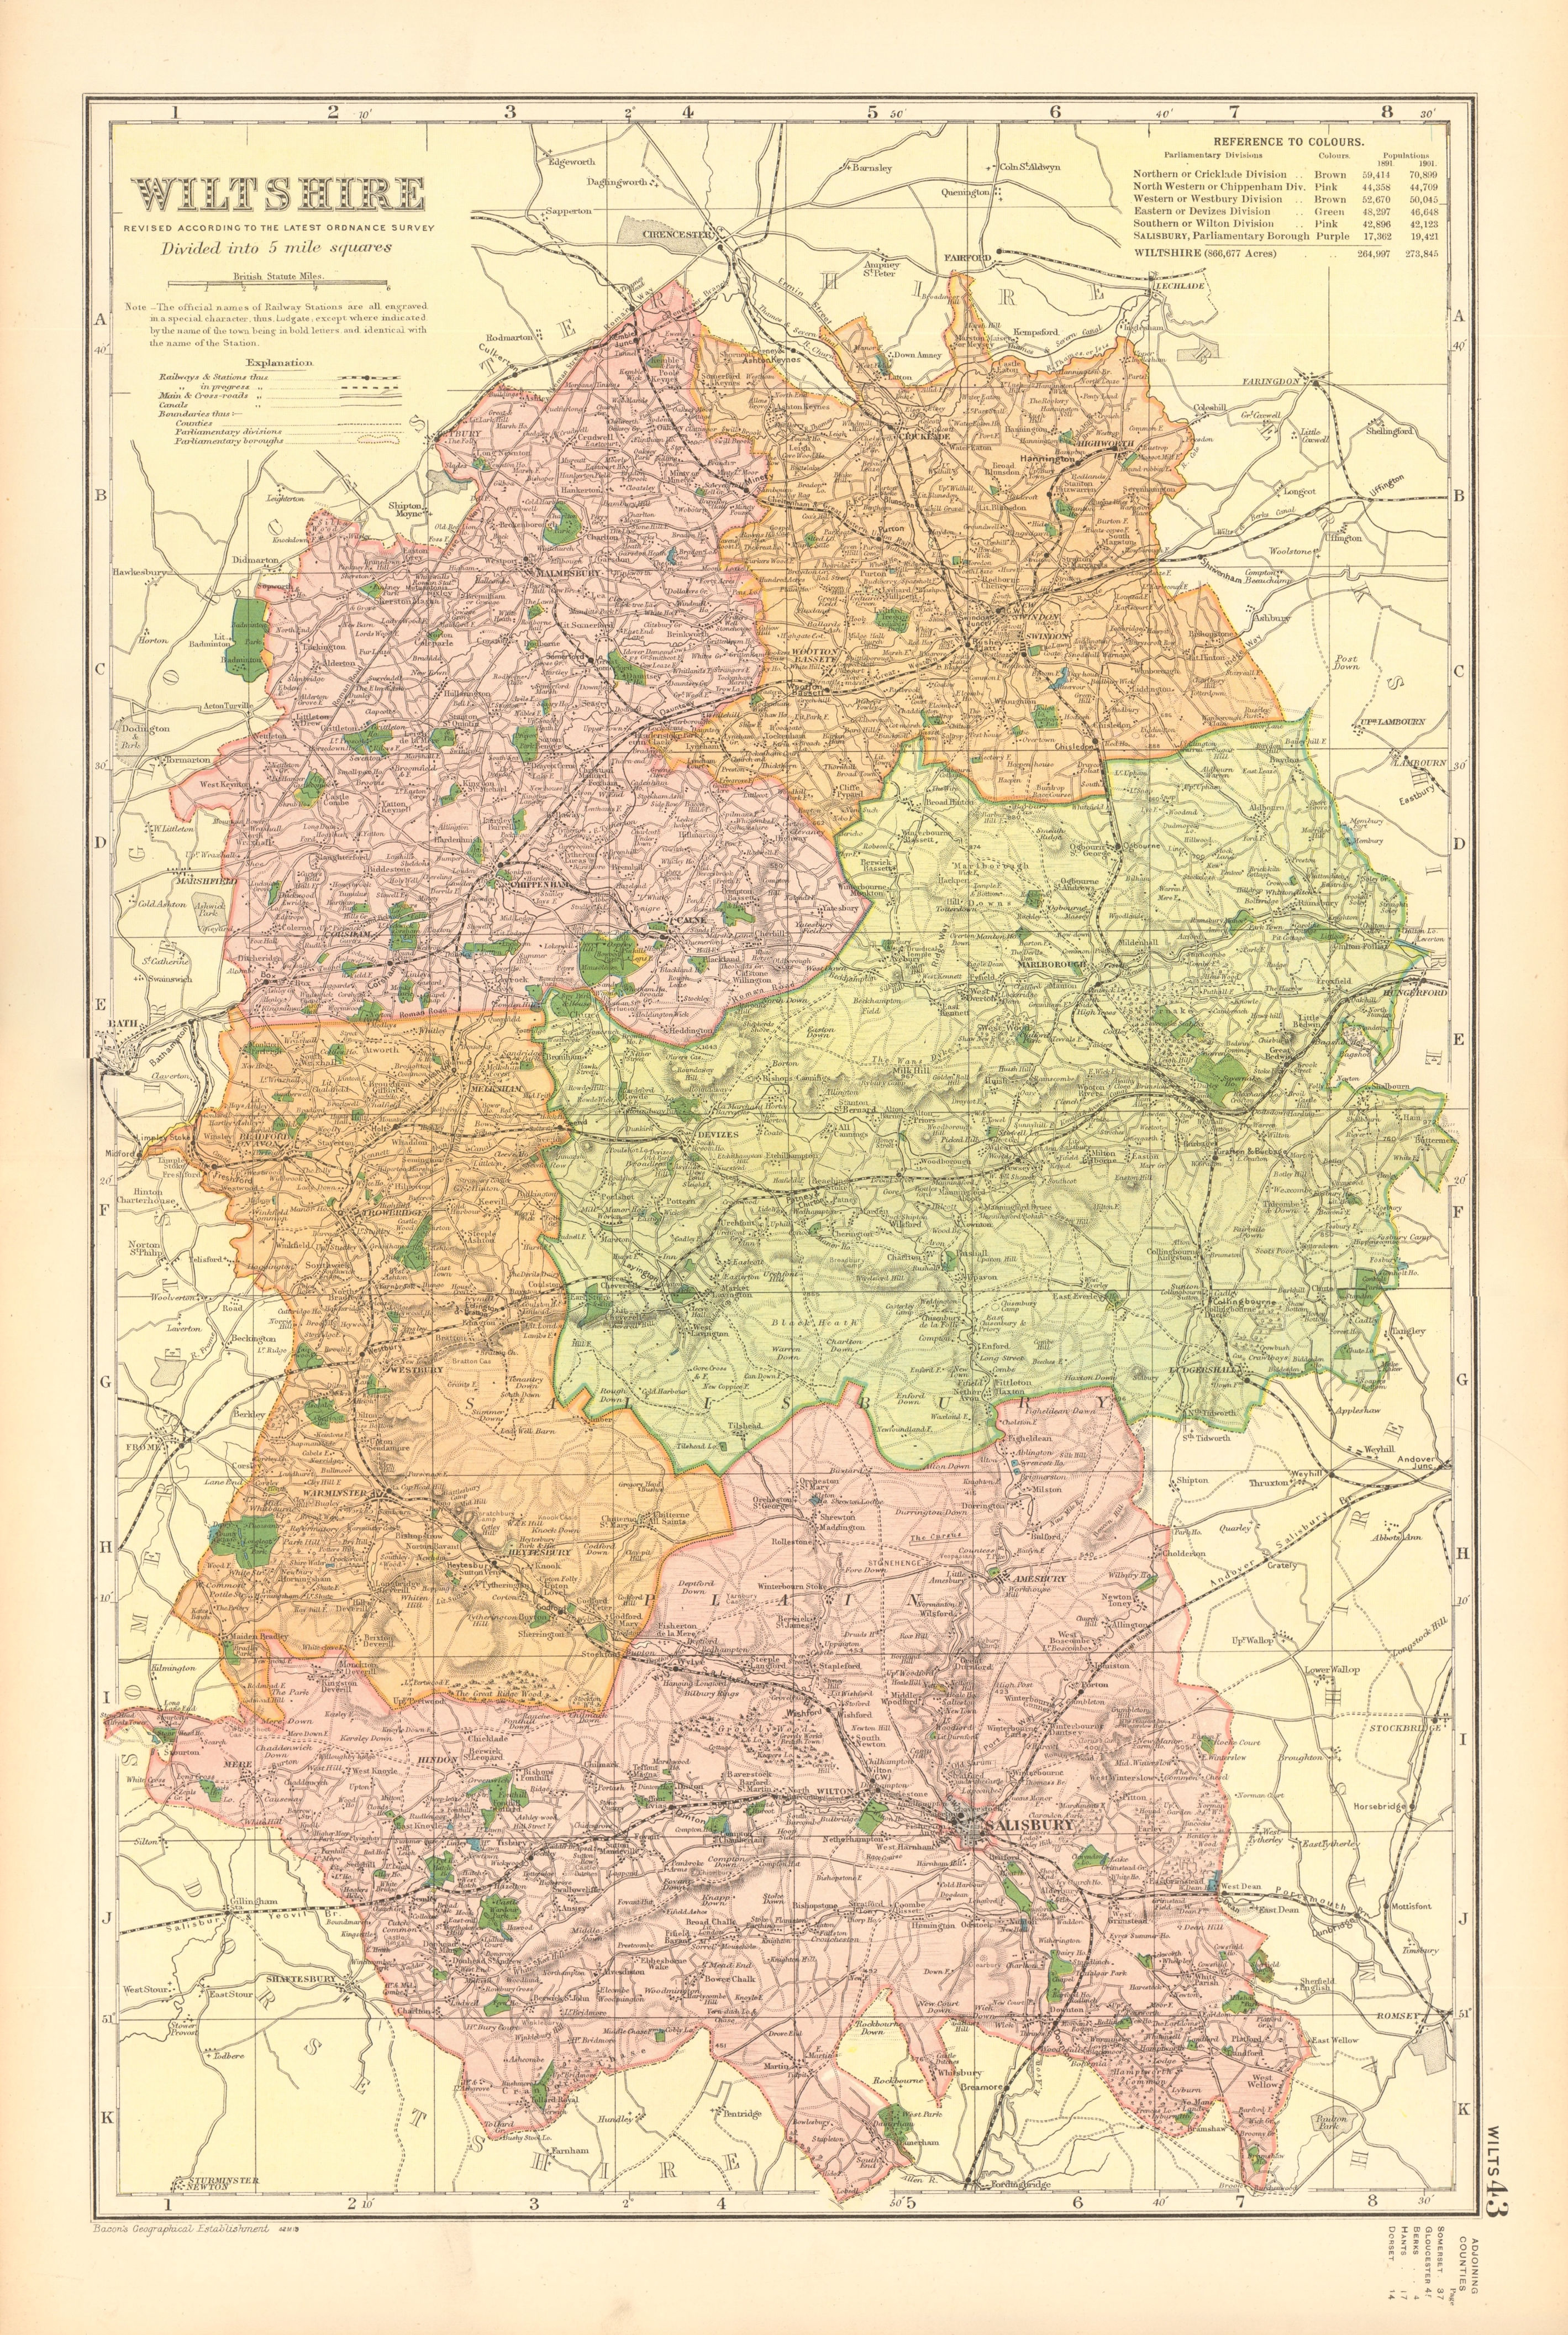 WILTSHIRE. Showing Parliamentary divisions, boroughs & parks. BACON 1904 map